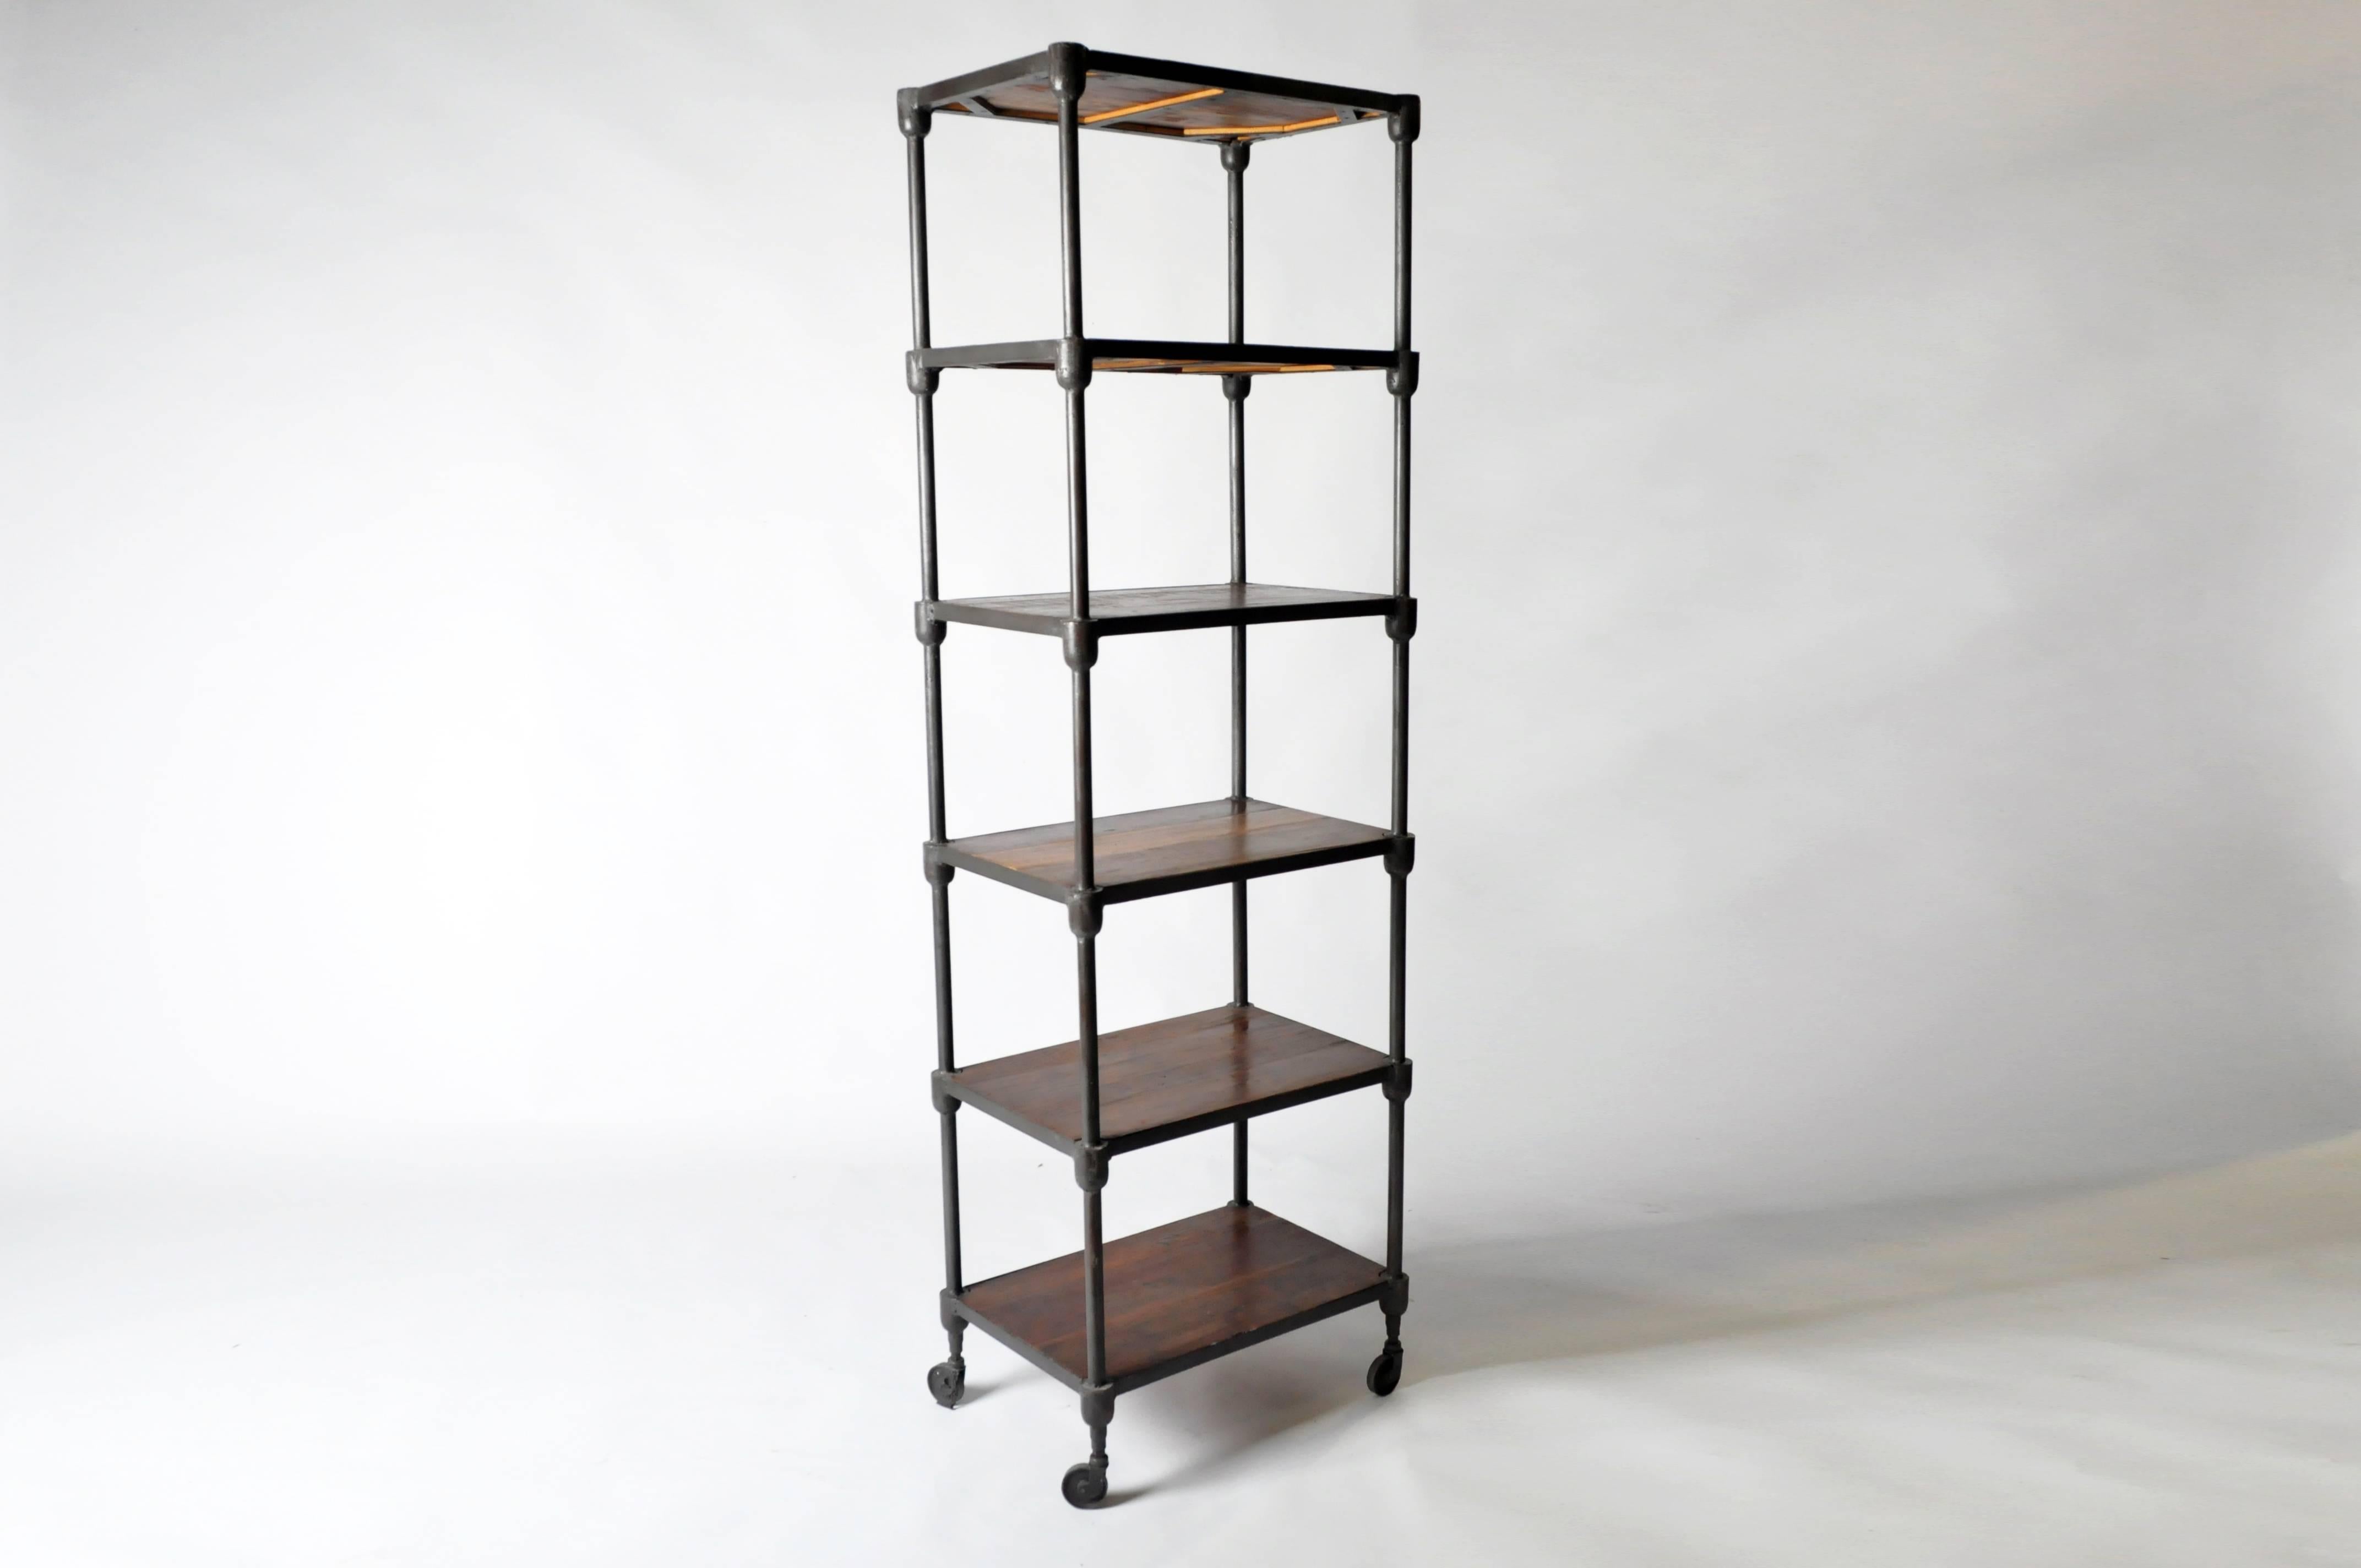 This Industrial shelving piece is from France and is made from metal and wood. It features five shelves for ample storage and display. It also has four wheels on the bottom.